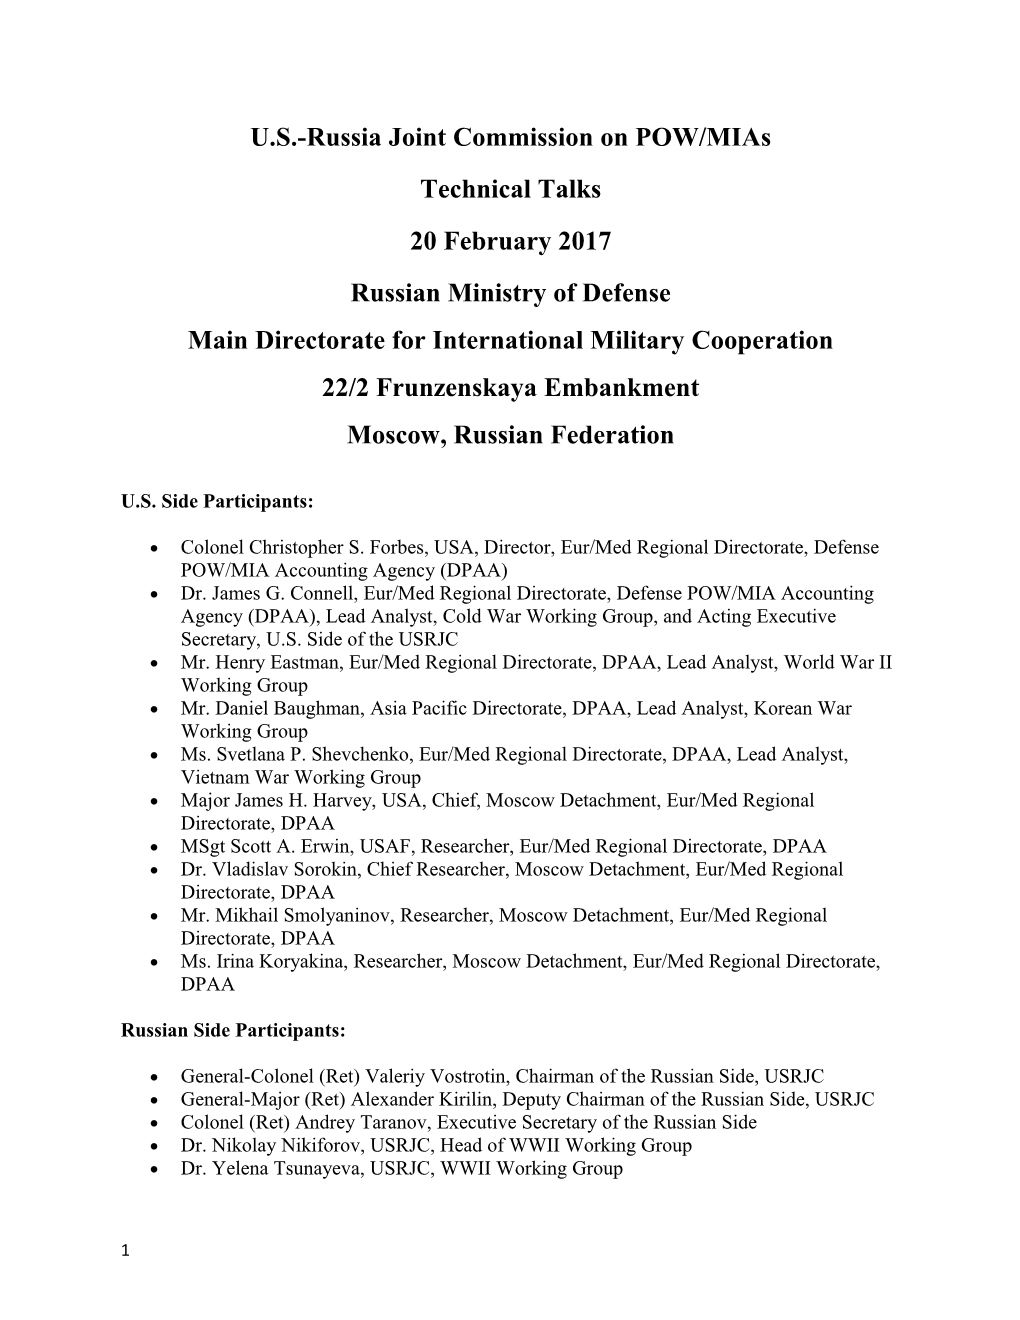 U.S.-Russia Joint Commission on POW/Mias